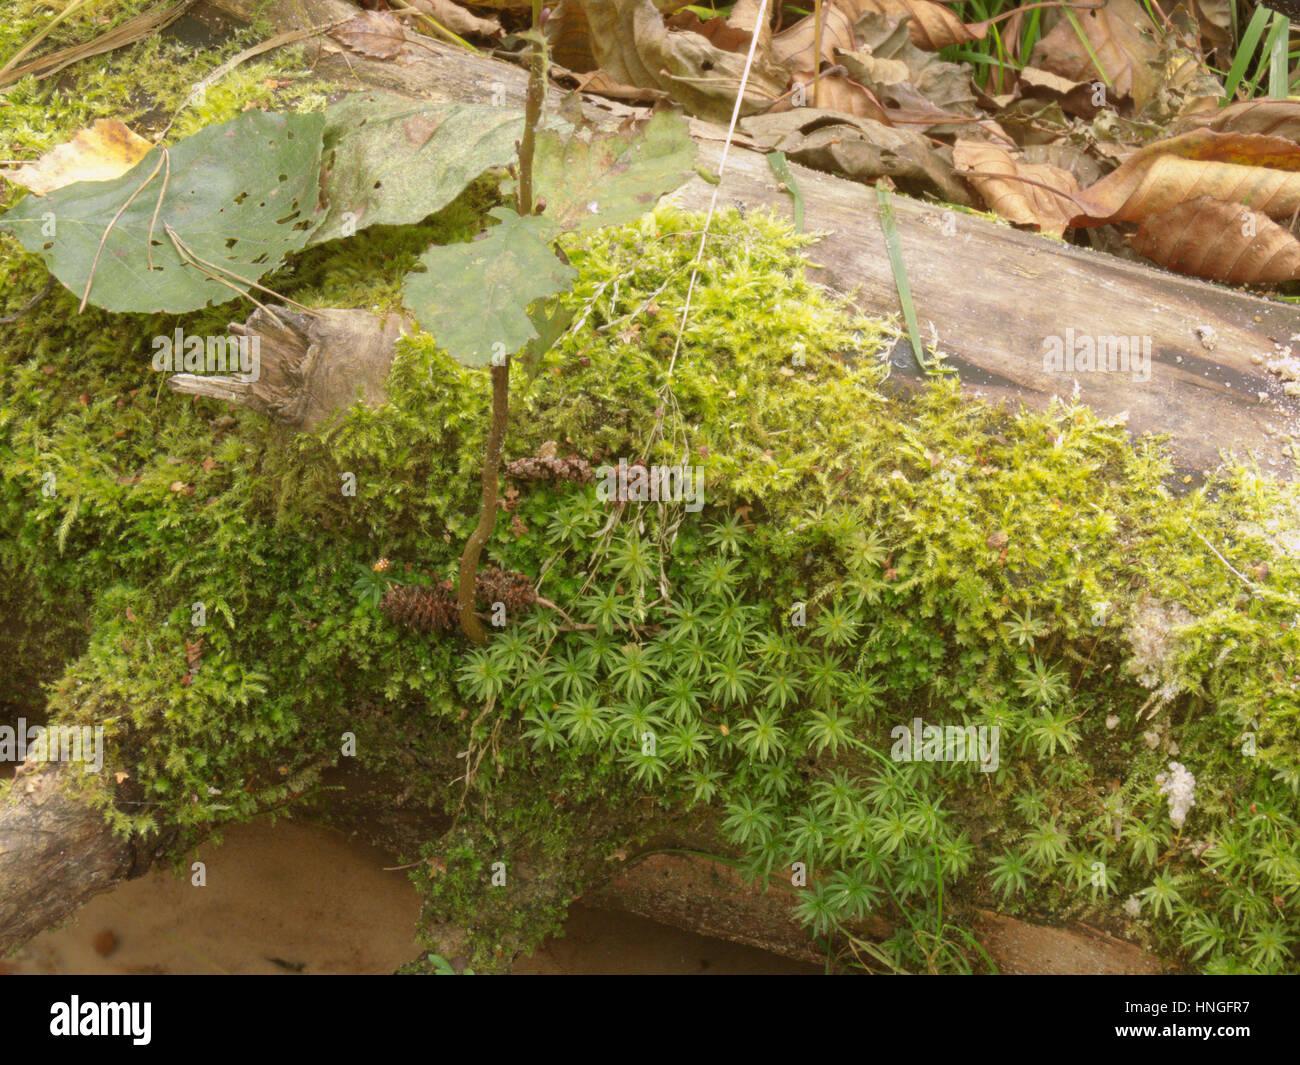 cirriphyllum-moss-and-common-hair-cap-moss-on-a-dry-heavy-timber-over-HNGFR7.jpg